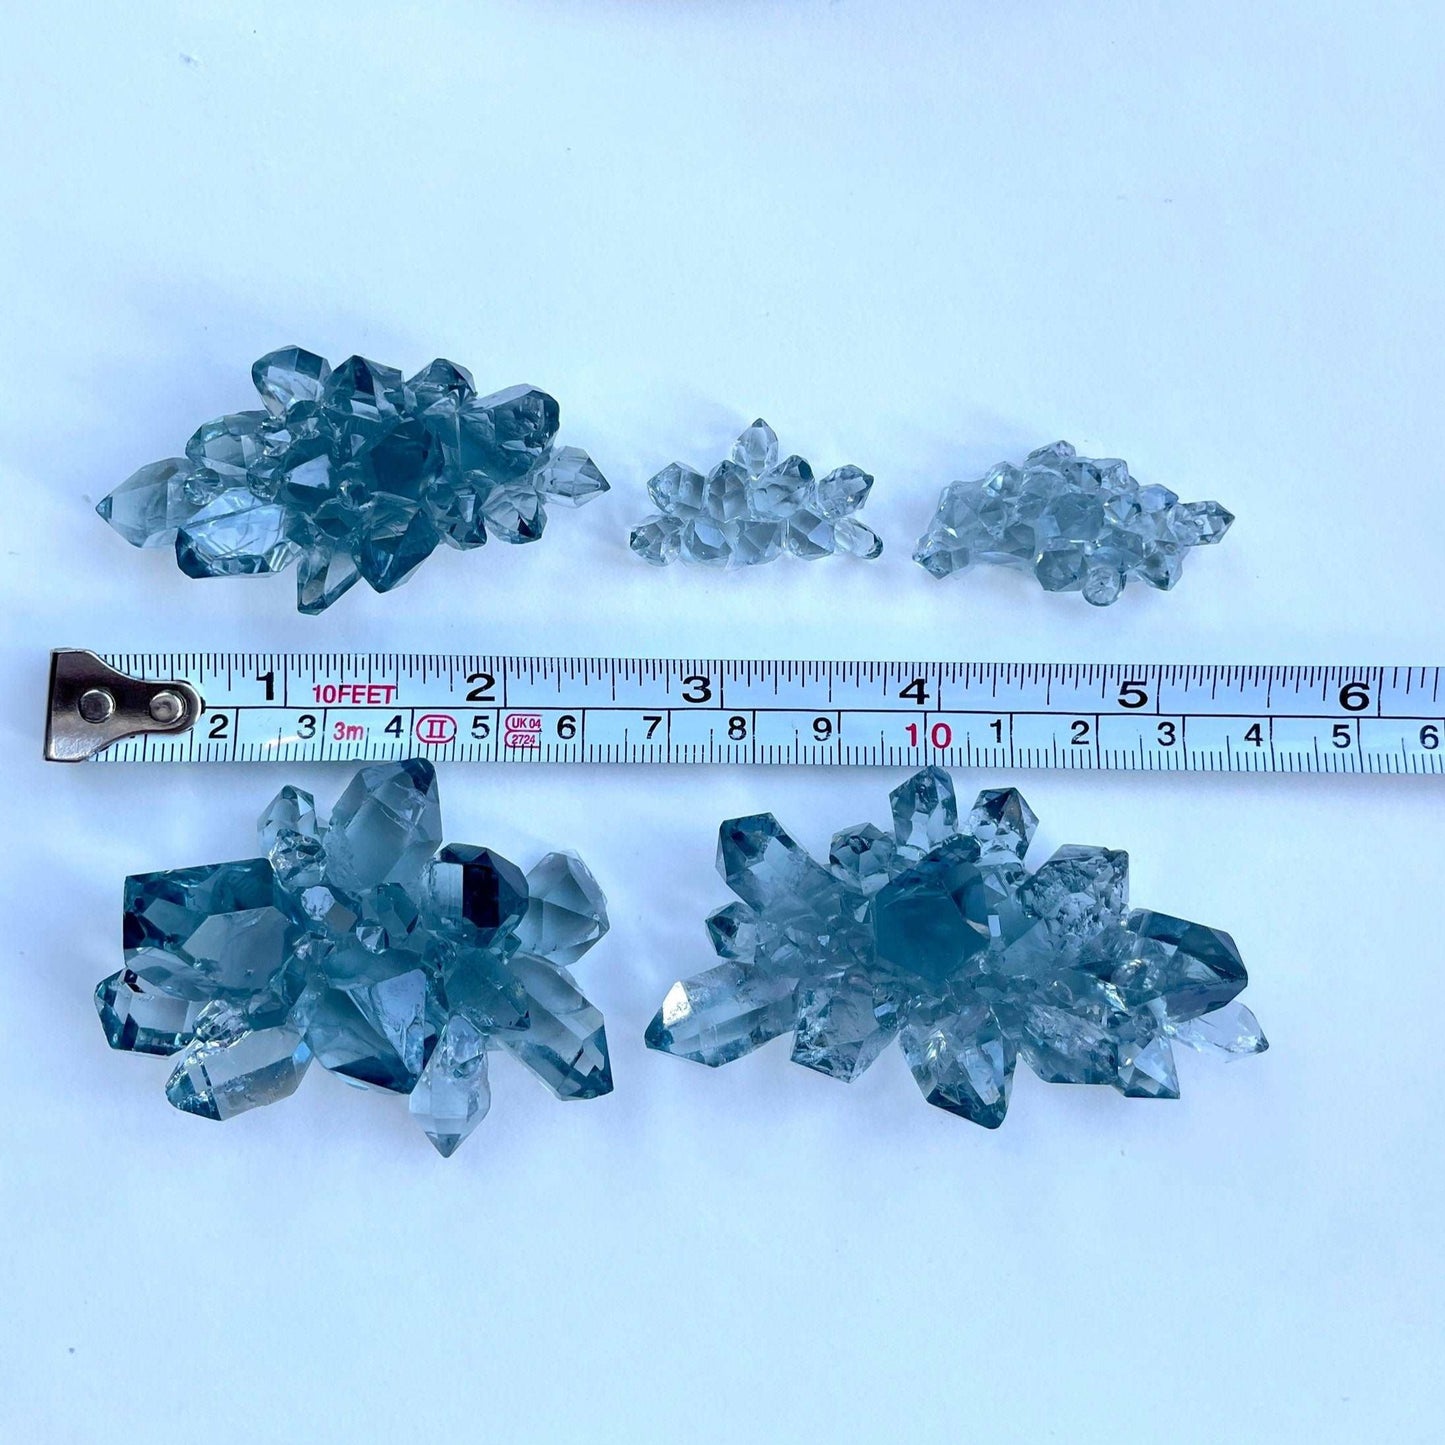 4.5 inch MEDIUM Crystal Cluster Silicone Mold for Resin – JuliArtStudio